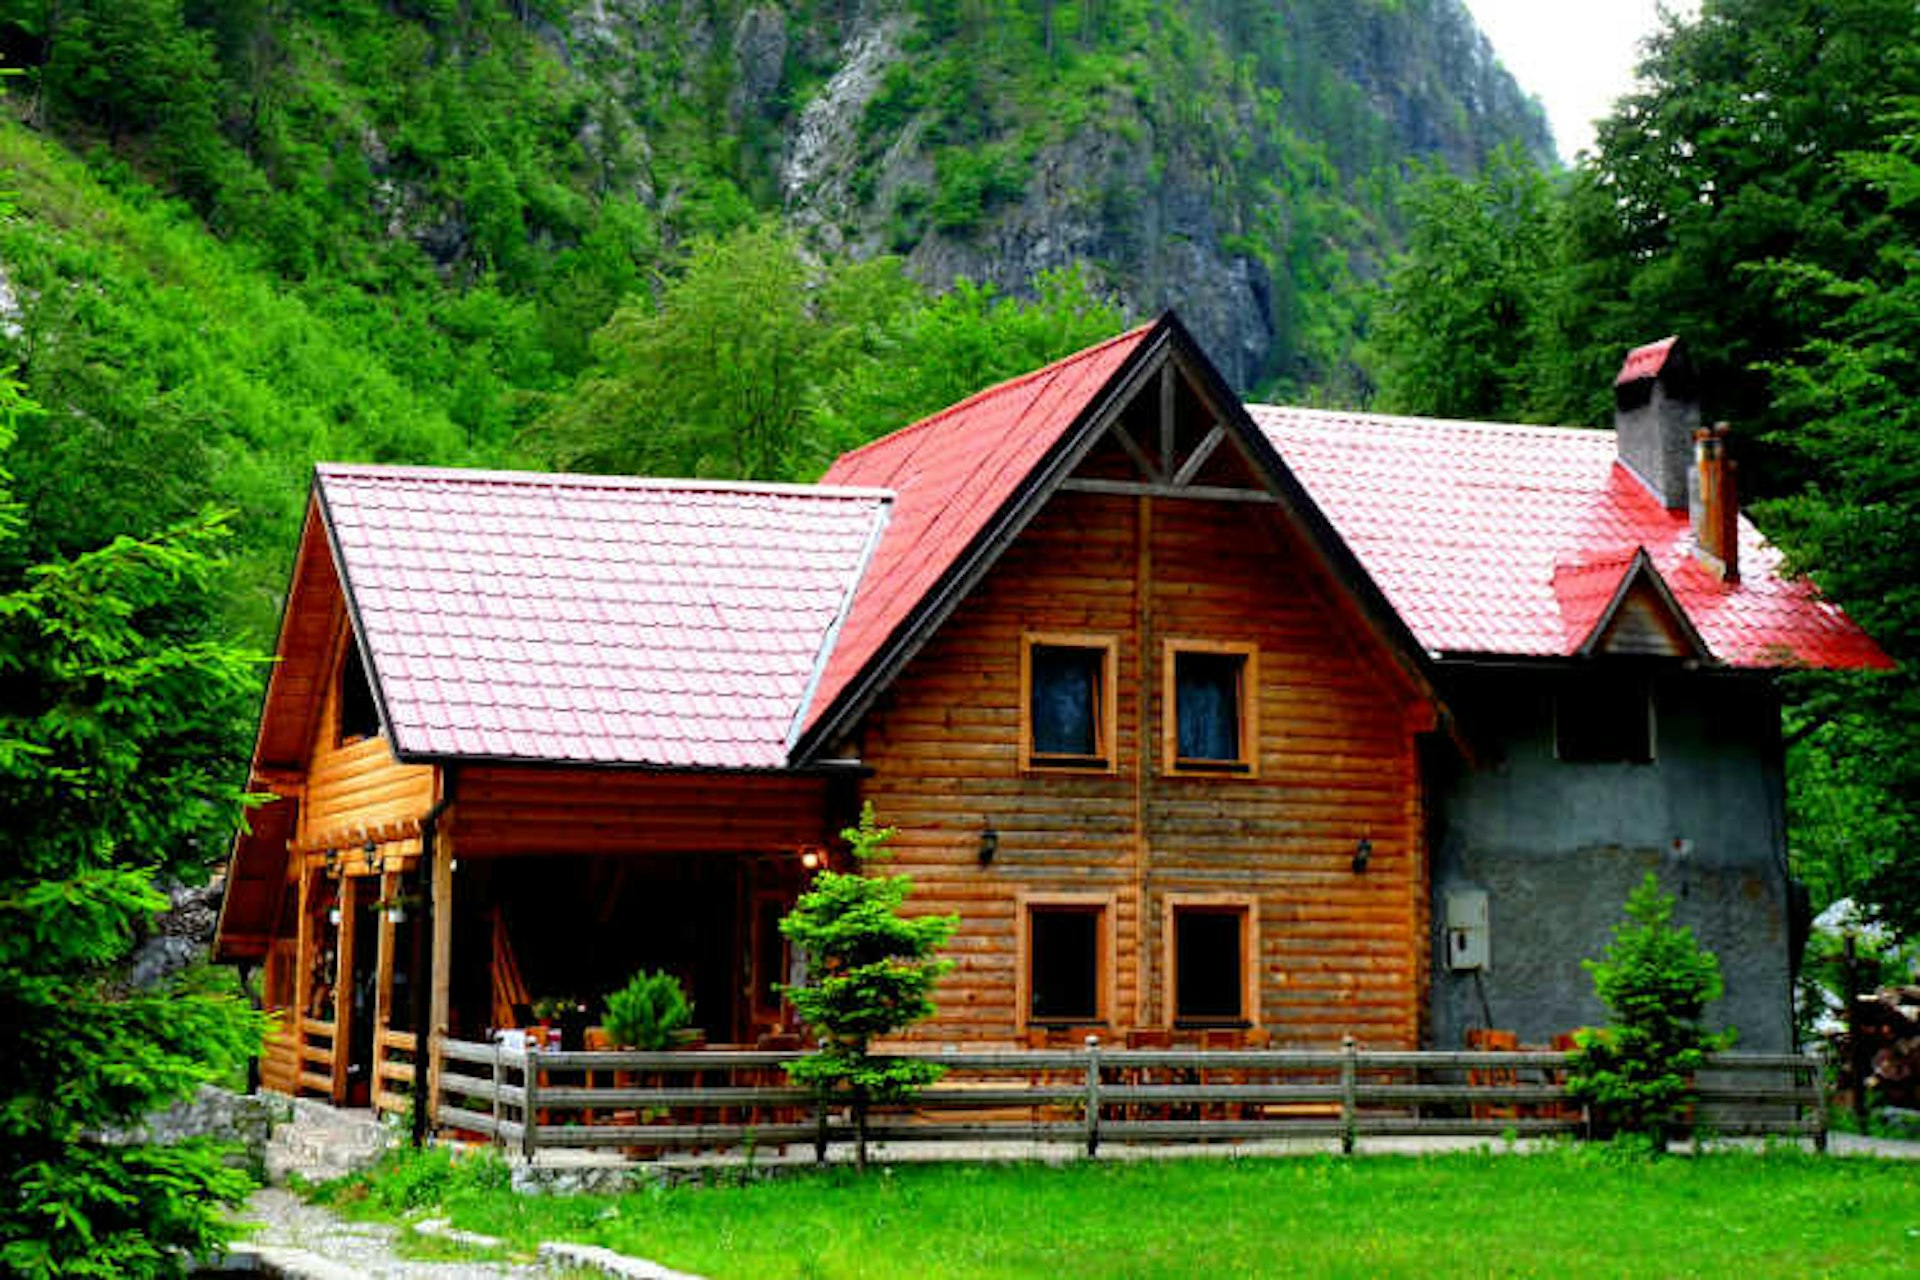 The famous Hotel Rilindja in Valbona. Image by Les Haines / CC BY 2.0